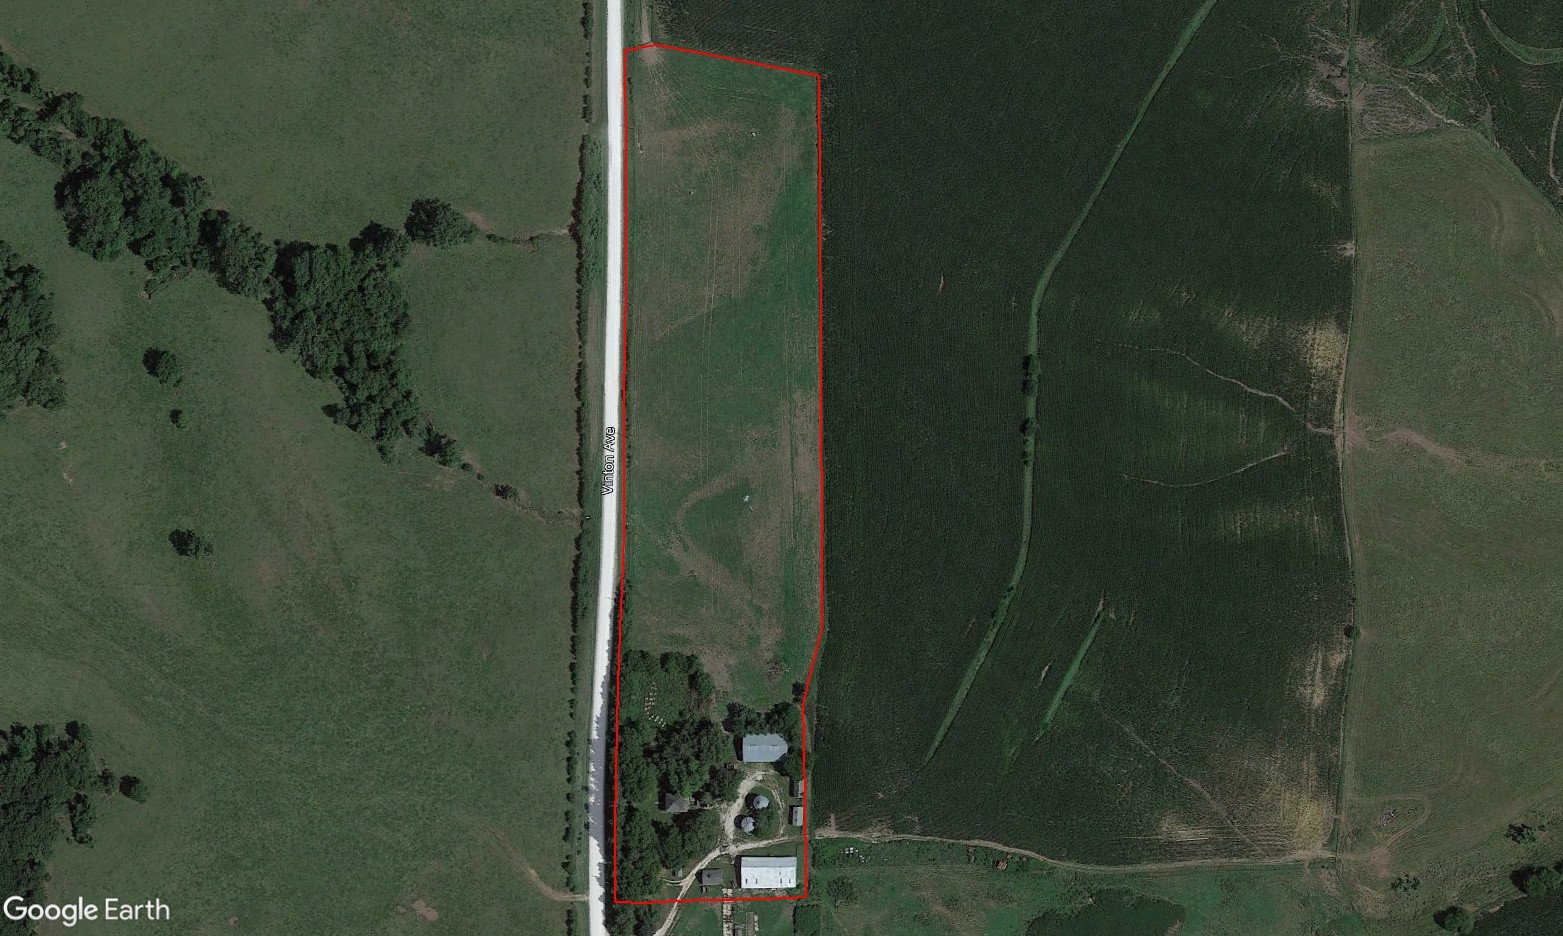 residential-adair-county-iowa-12-acres-listing-number-16627-2586 Vinton Ave Greenfield, IA + ~12 Acres - Google Close-0.jpg